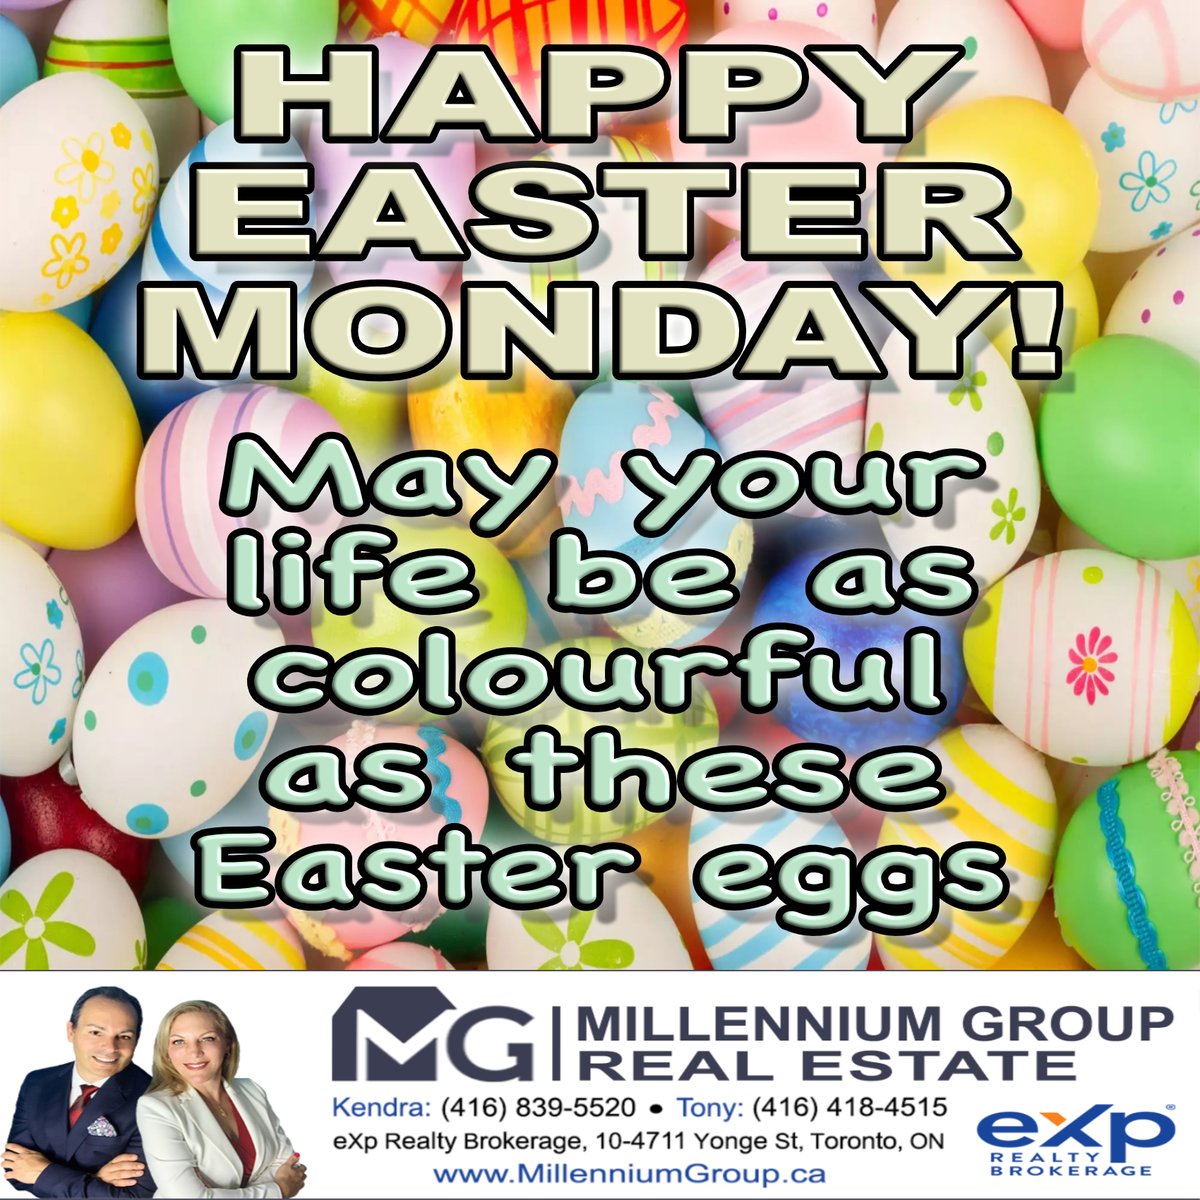 Hope you had a wonderful long weekend! For those who observe, a happy and blessed Easter Monday!🐣

#EasterMonday #HappyEaster #Easter2024 #KendraCutroneBroker #TonyCutroneRealtor #MillenniumGroupRealEstate #FREEHomeEvaluation #FREEHomeStaging #FixAndFlipExpert #WeSellForMore